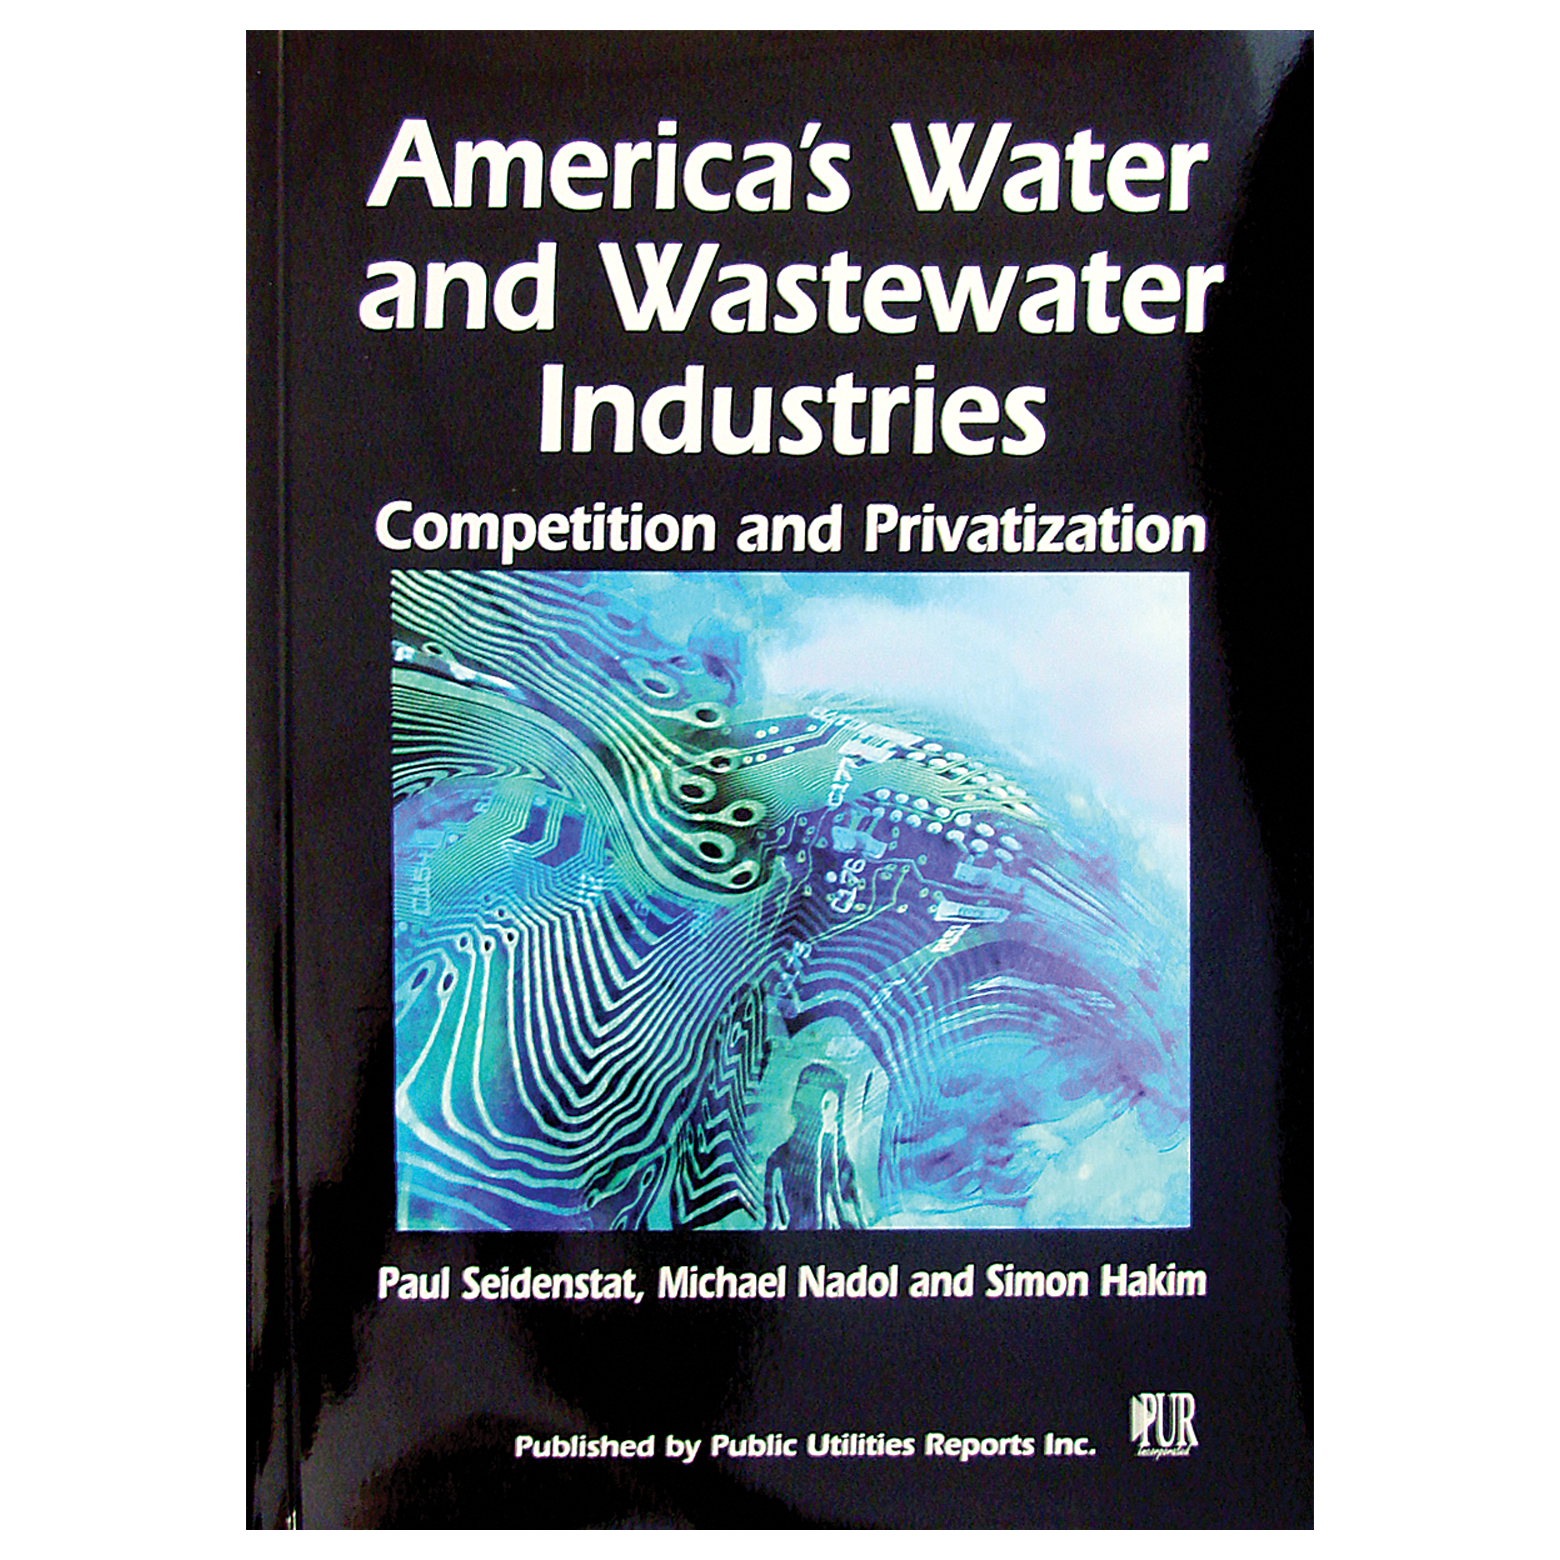 America's Water and Wastewater Industries: Competition and Privatization